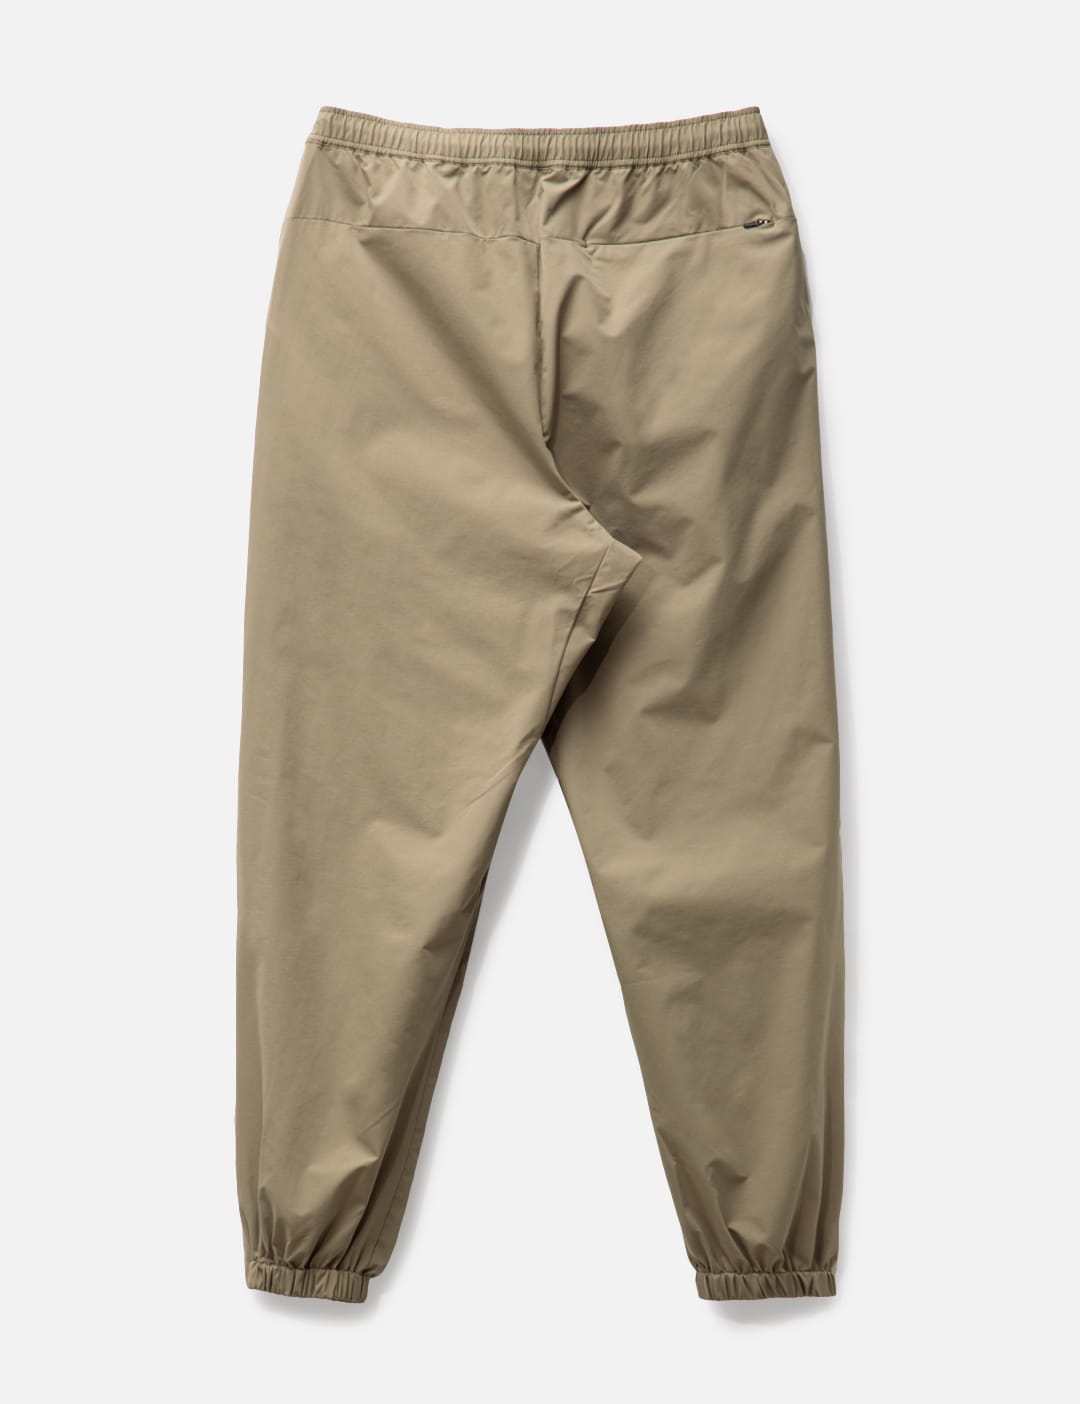 F.C. Real Bristol - VENTILATION LOGO EASY PANTS | HBX - Globally Curated  Fashion and Lifestyle by Hypebeast